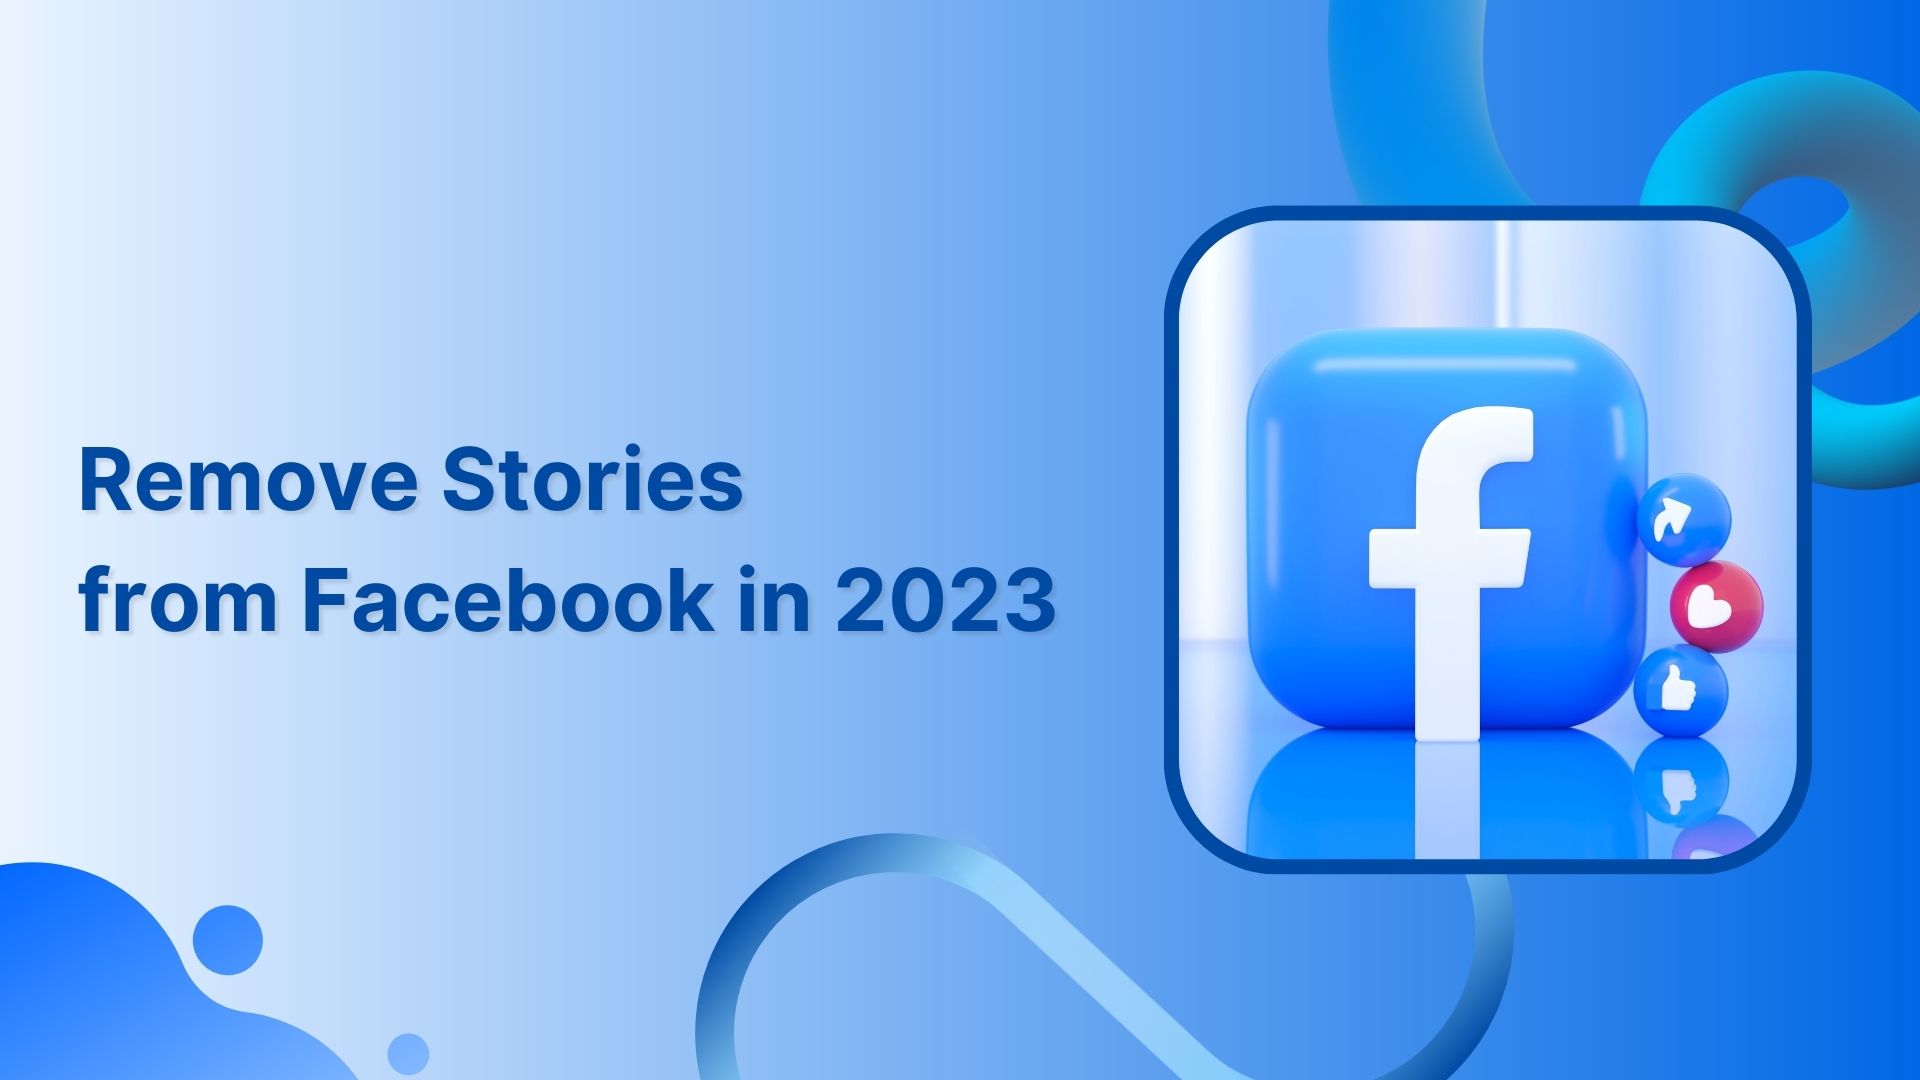 How to Remove Stories from Facebook in 2023?